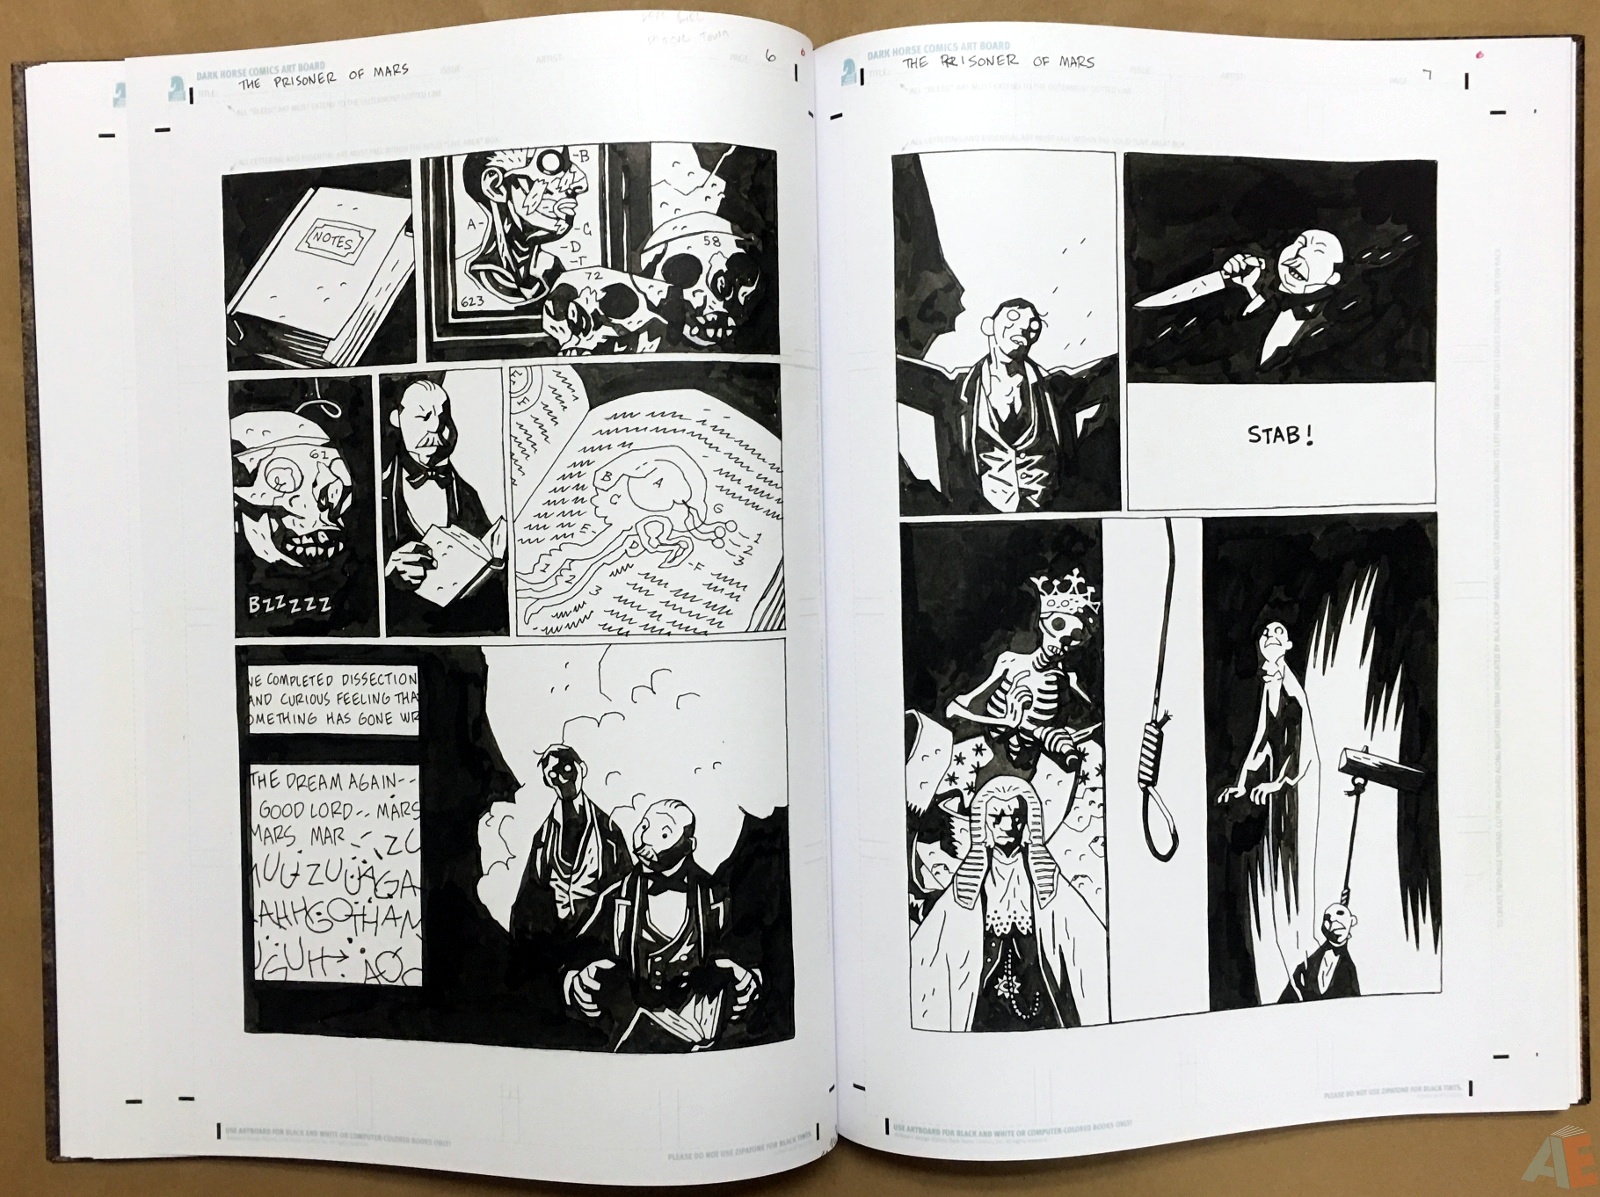 Mike Mignola’s The Amazing Screw-On Head and Other Curious Objects Artist’s Edition